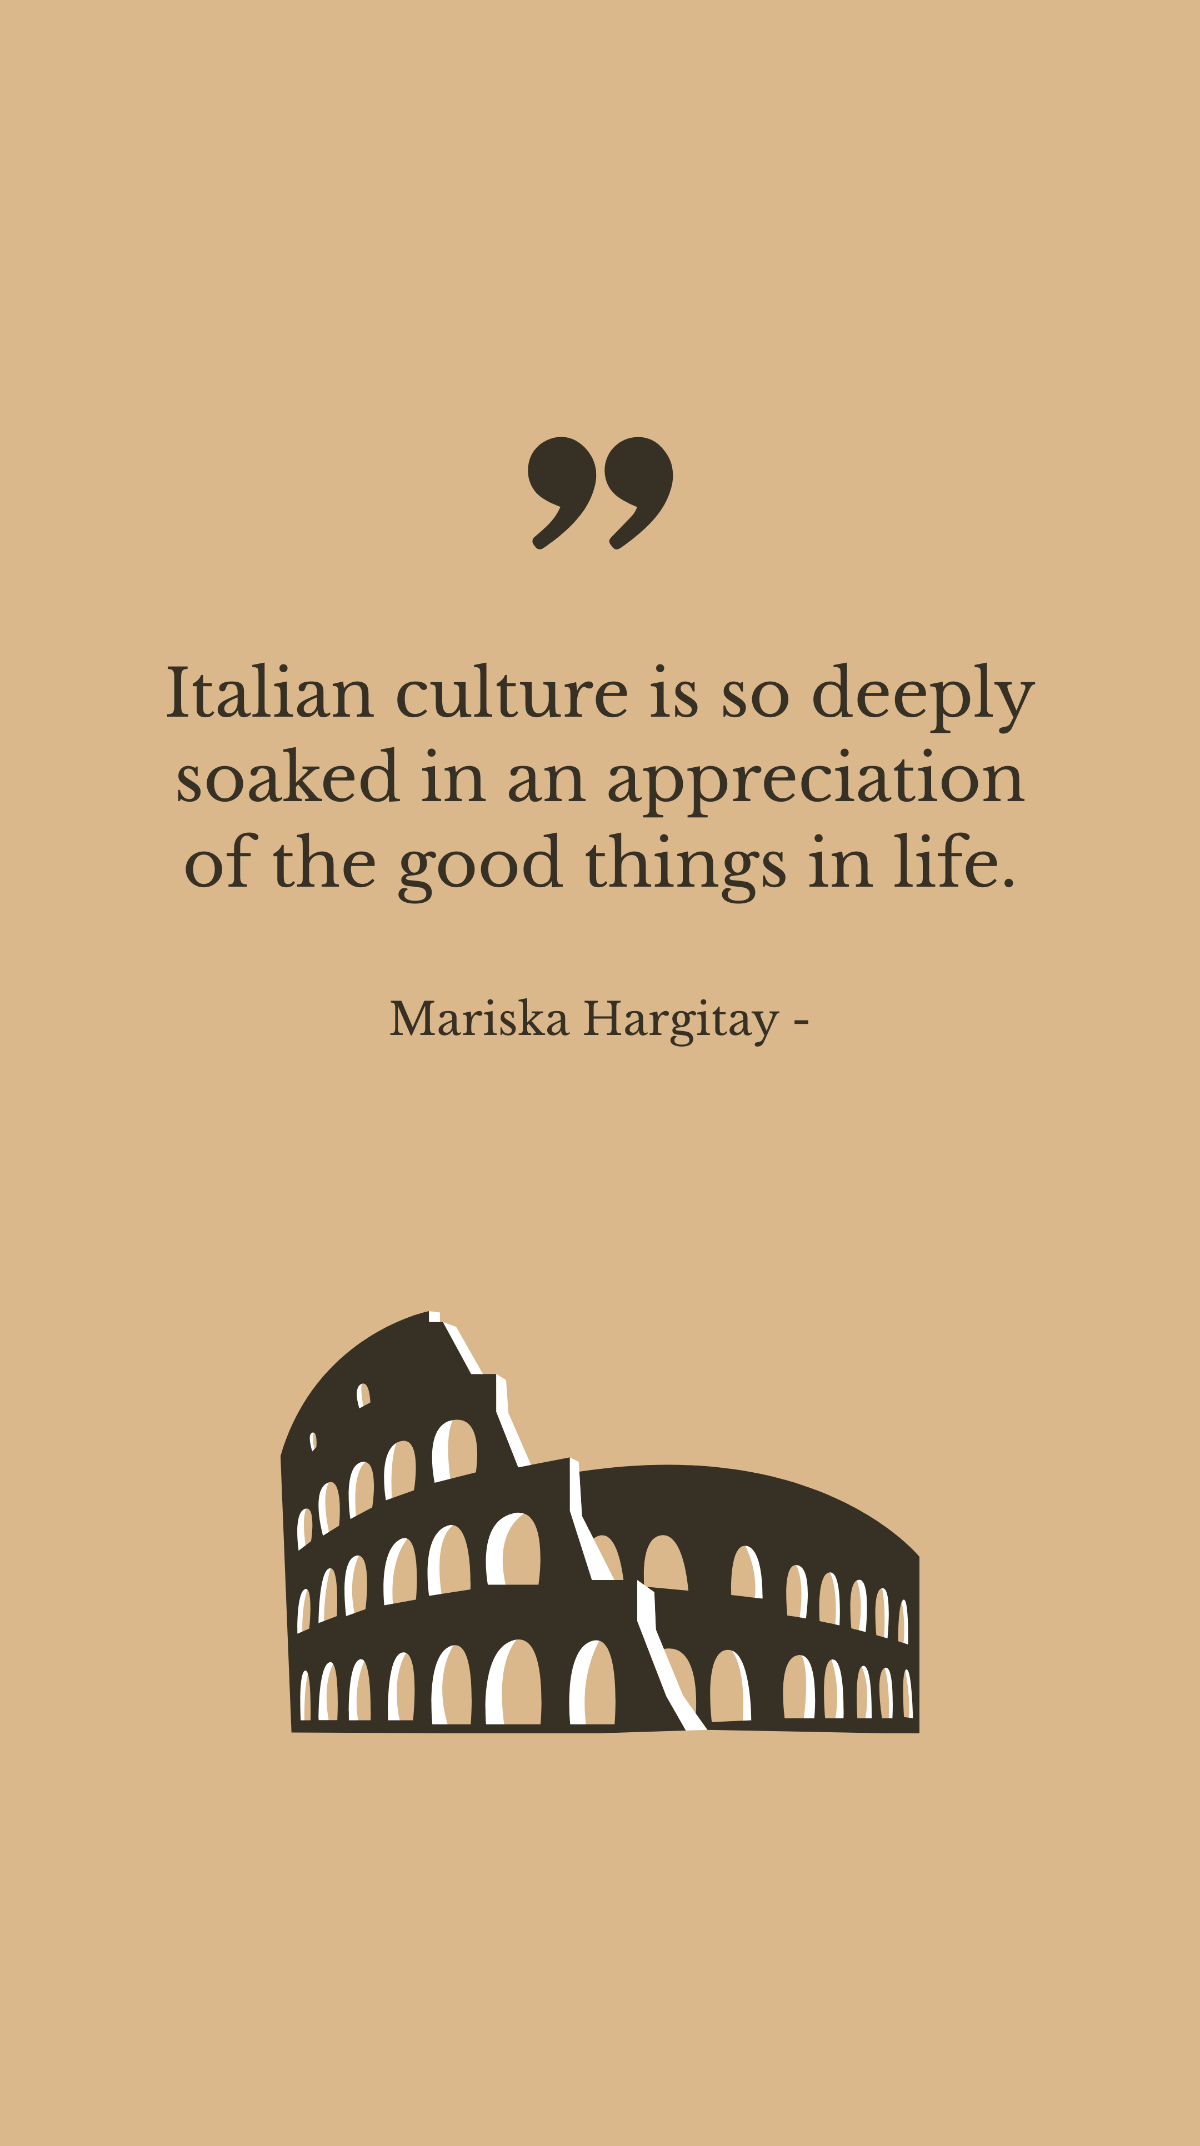 Free Mariska Hargitay - Italian culture is so deeply soaked in an appreciation of the good things in life. Template